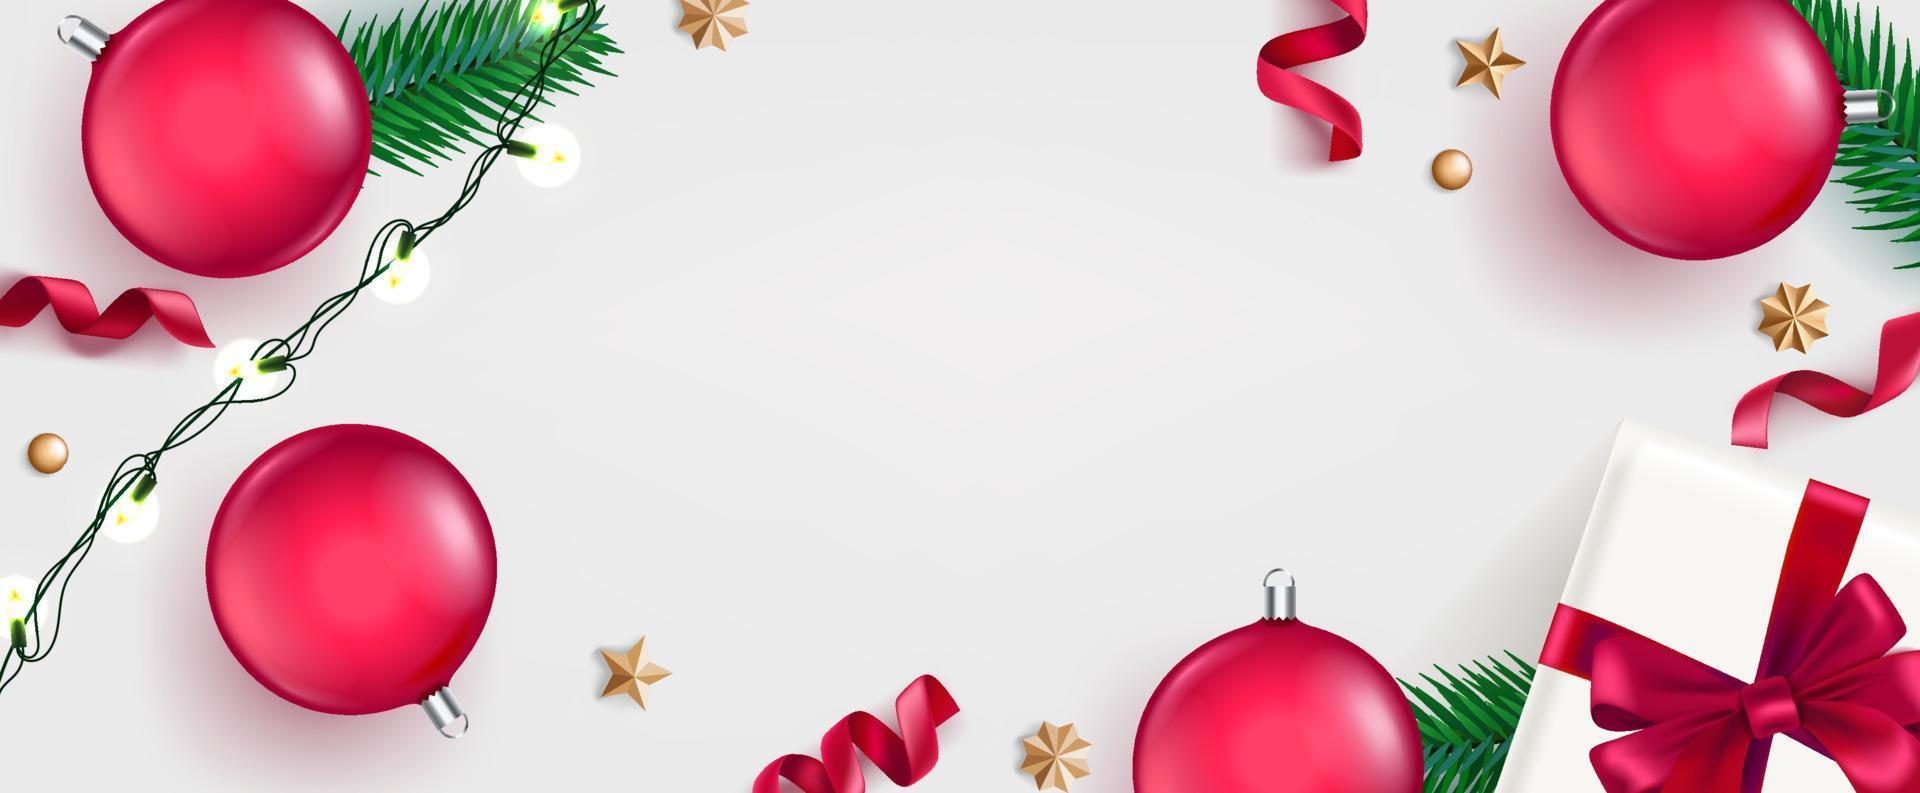 Christmas flat lay background with holiday elements vector